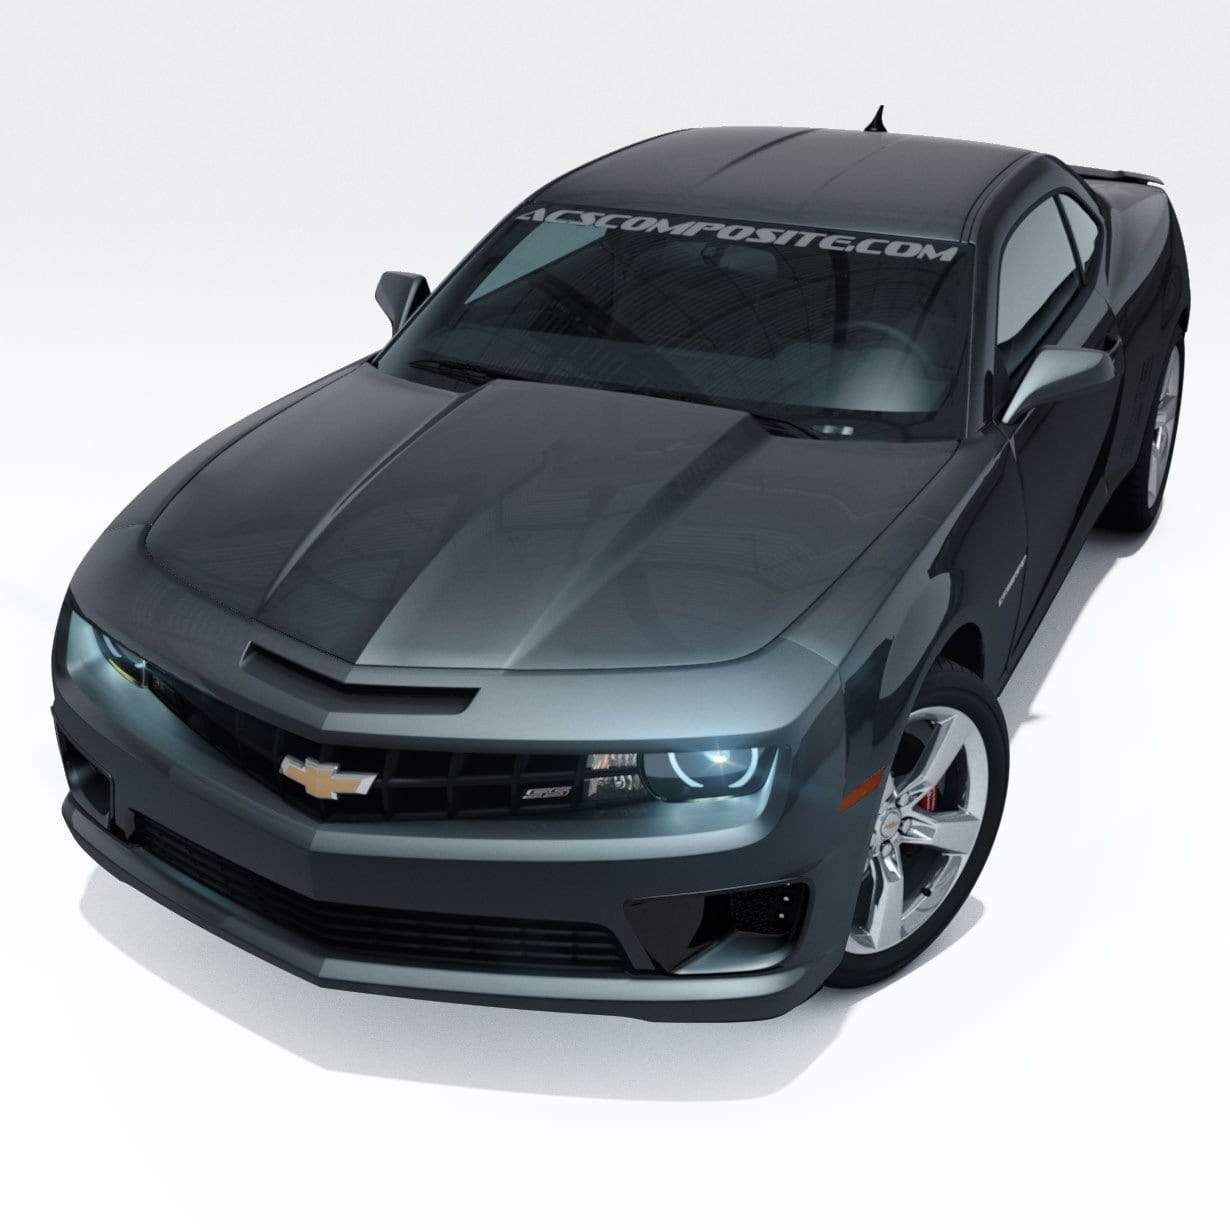 ACS Composite T3/S Front Bumper Ports [33-4-036]SBK[33-4-086] for Camaro SS V8 - Improved Airflow & Styling